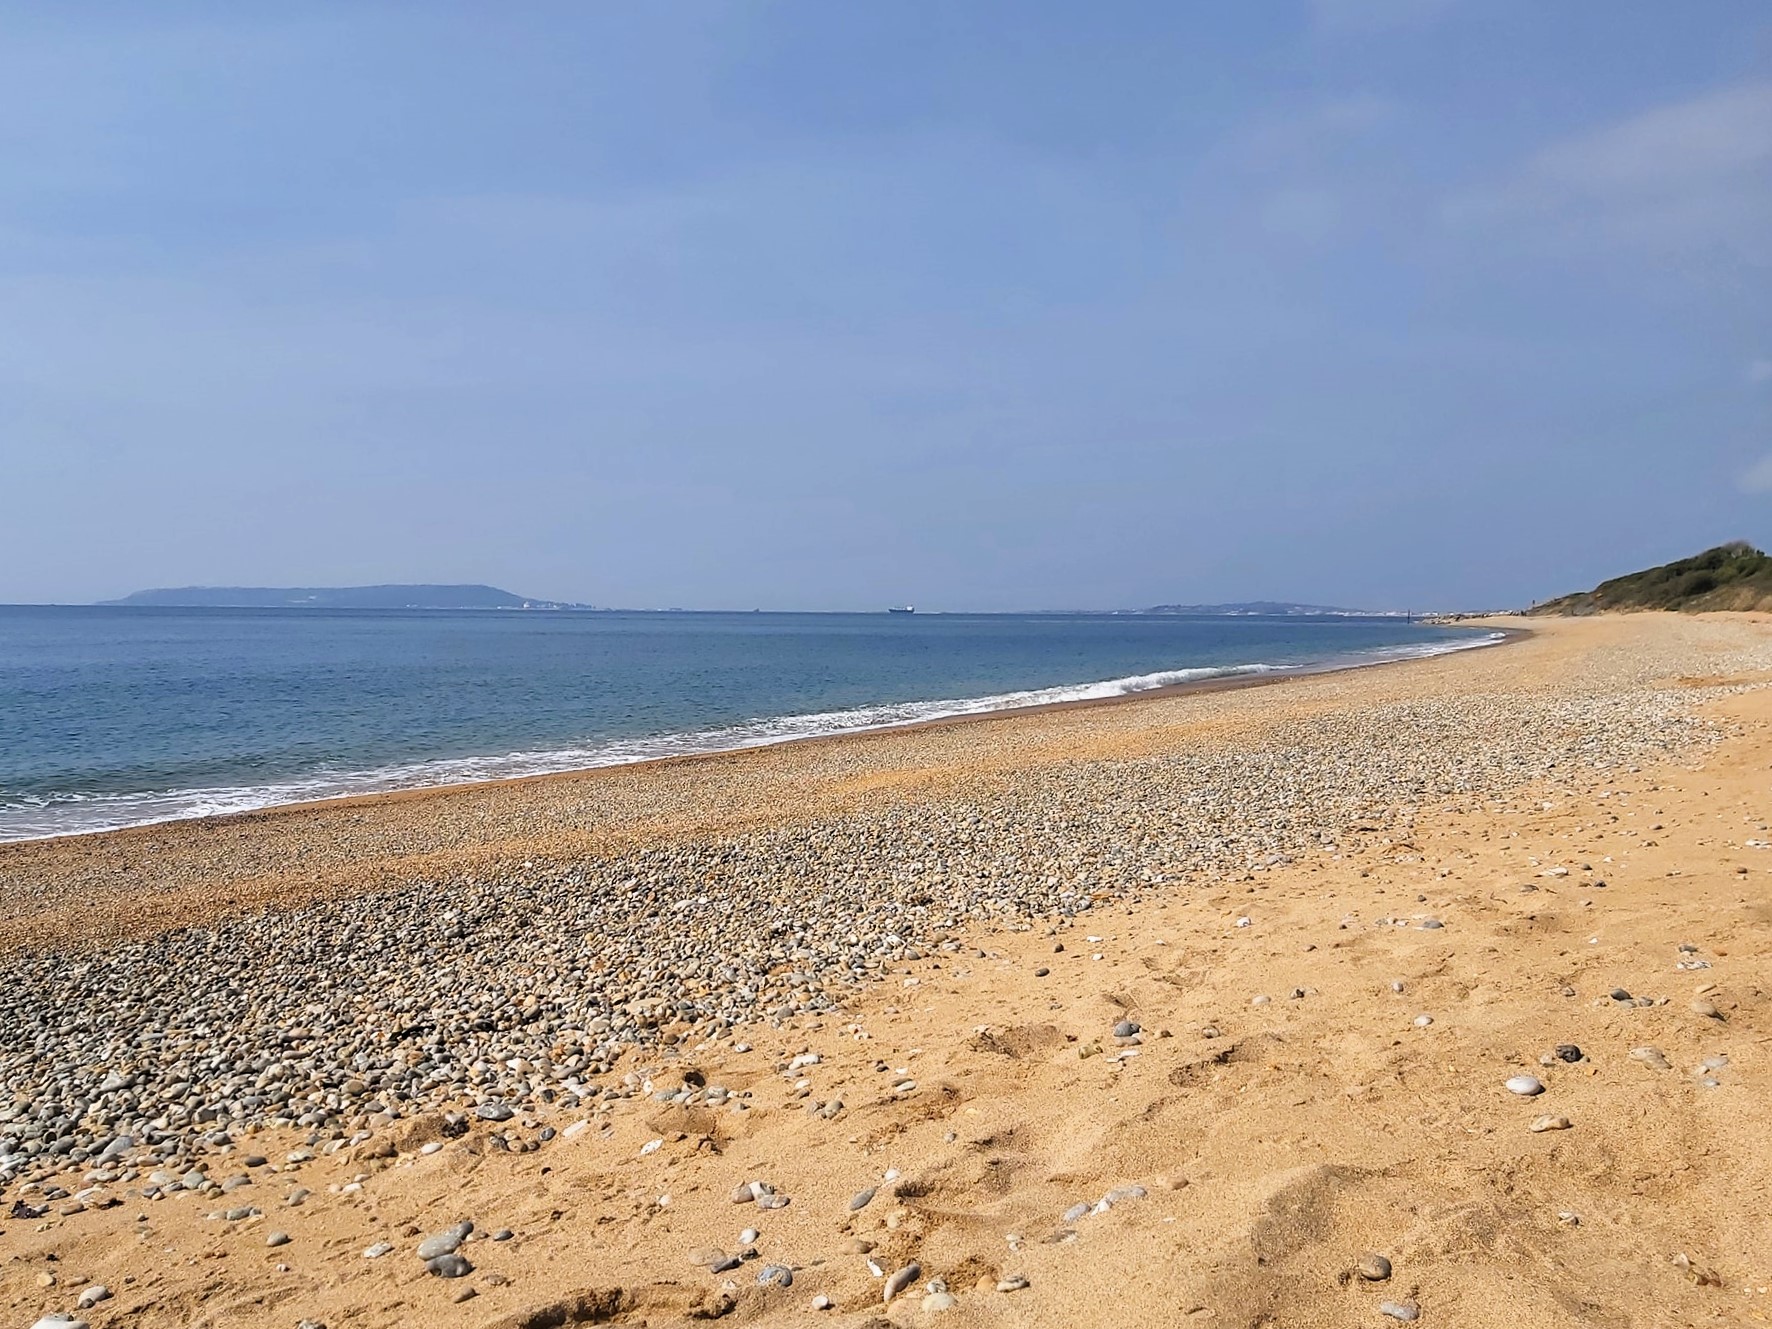 A beach view with a boat in the distance at Ringstead beach, Dorset, England